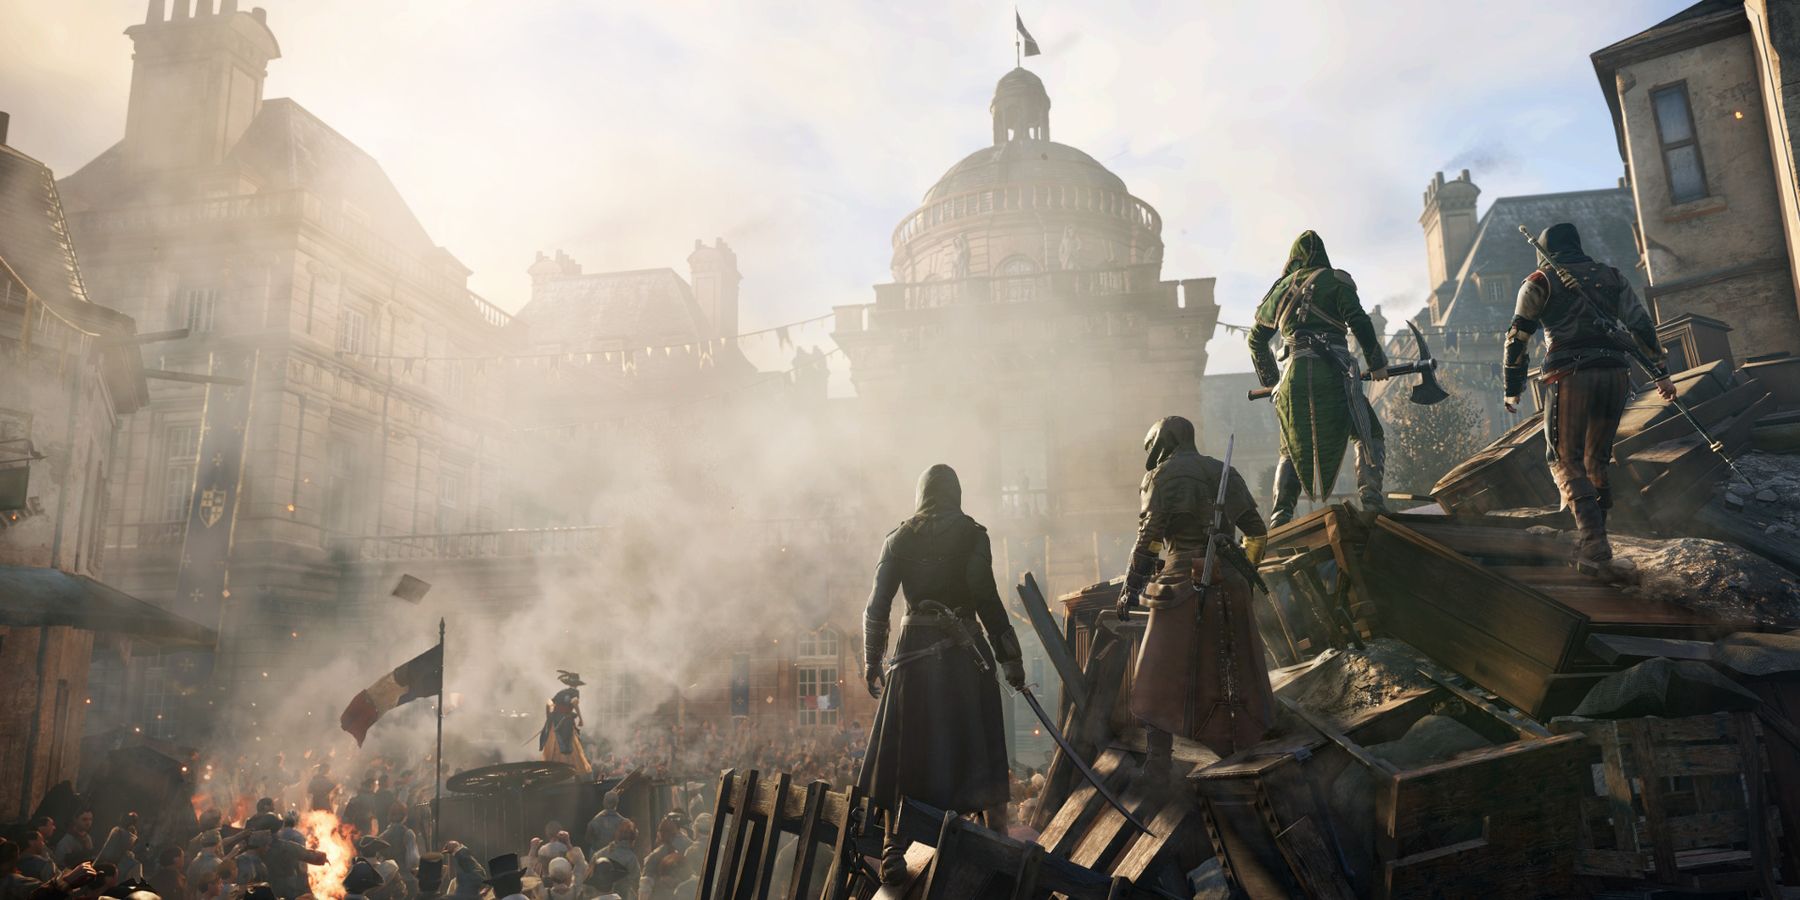 Promo picture for Assassin's Creed Unity's co-op mode